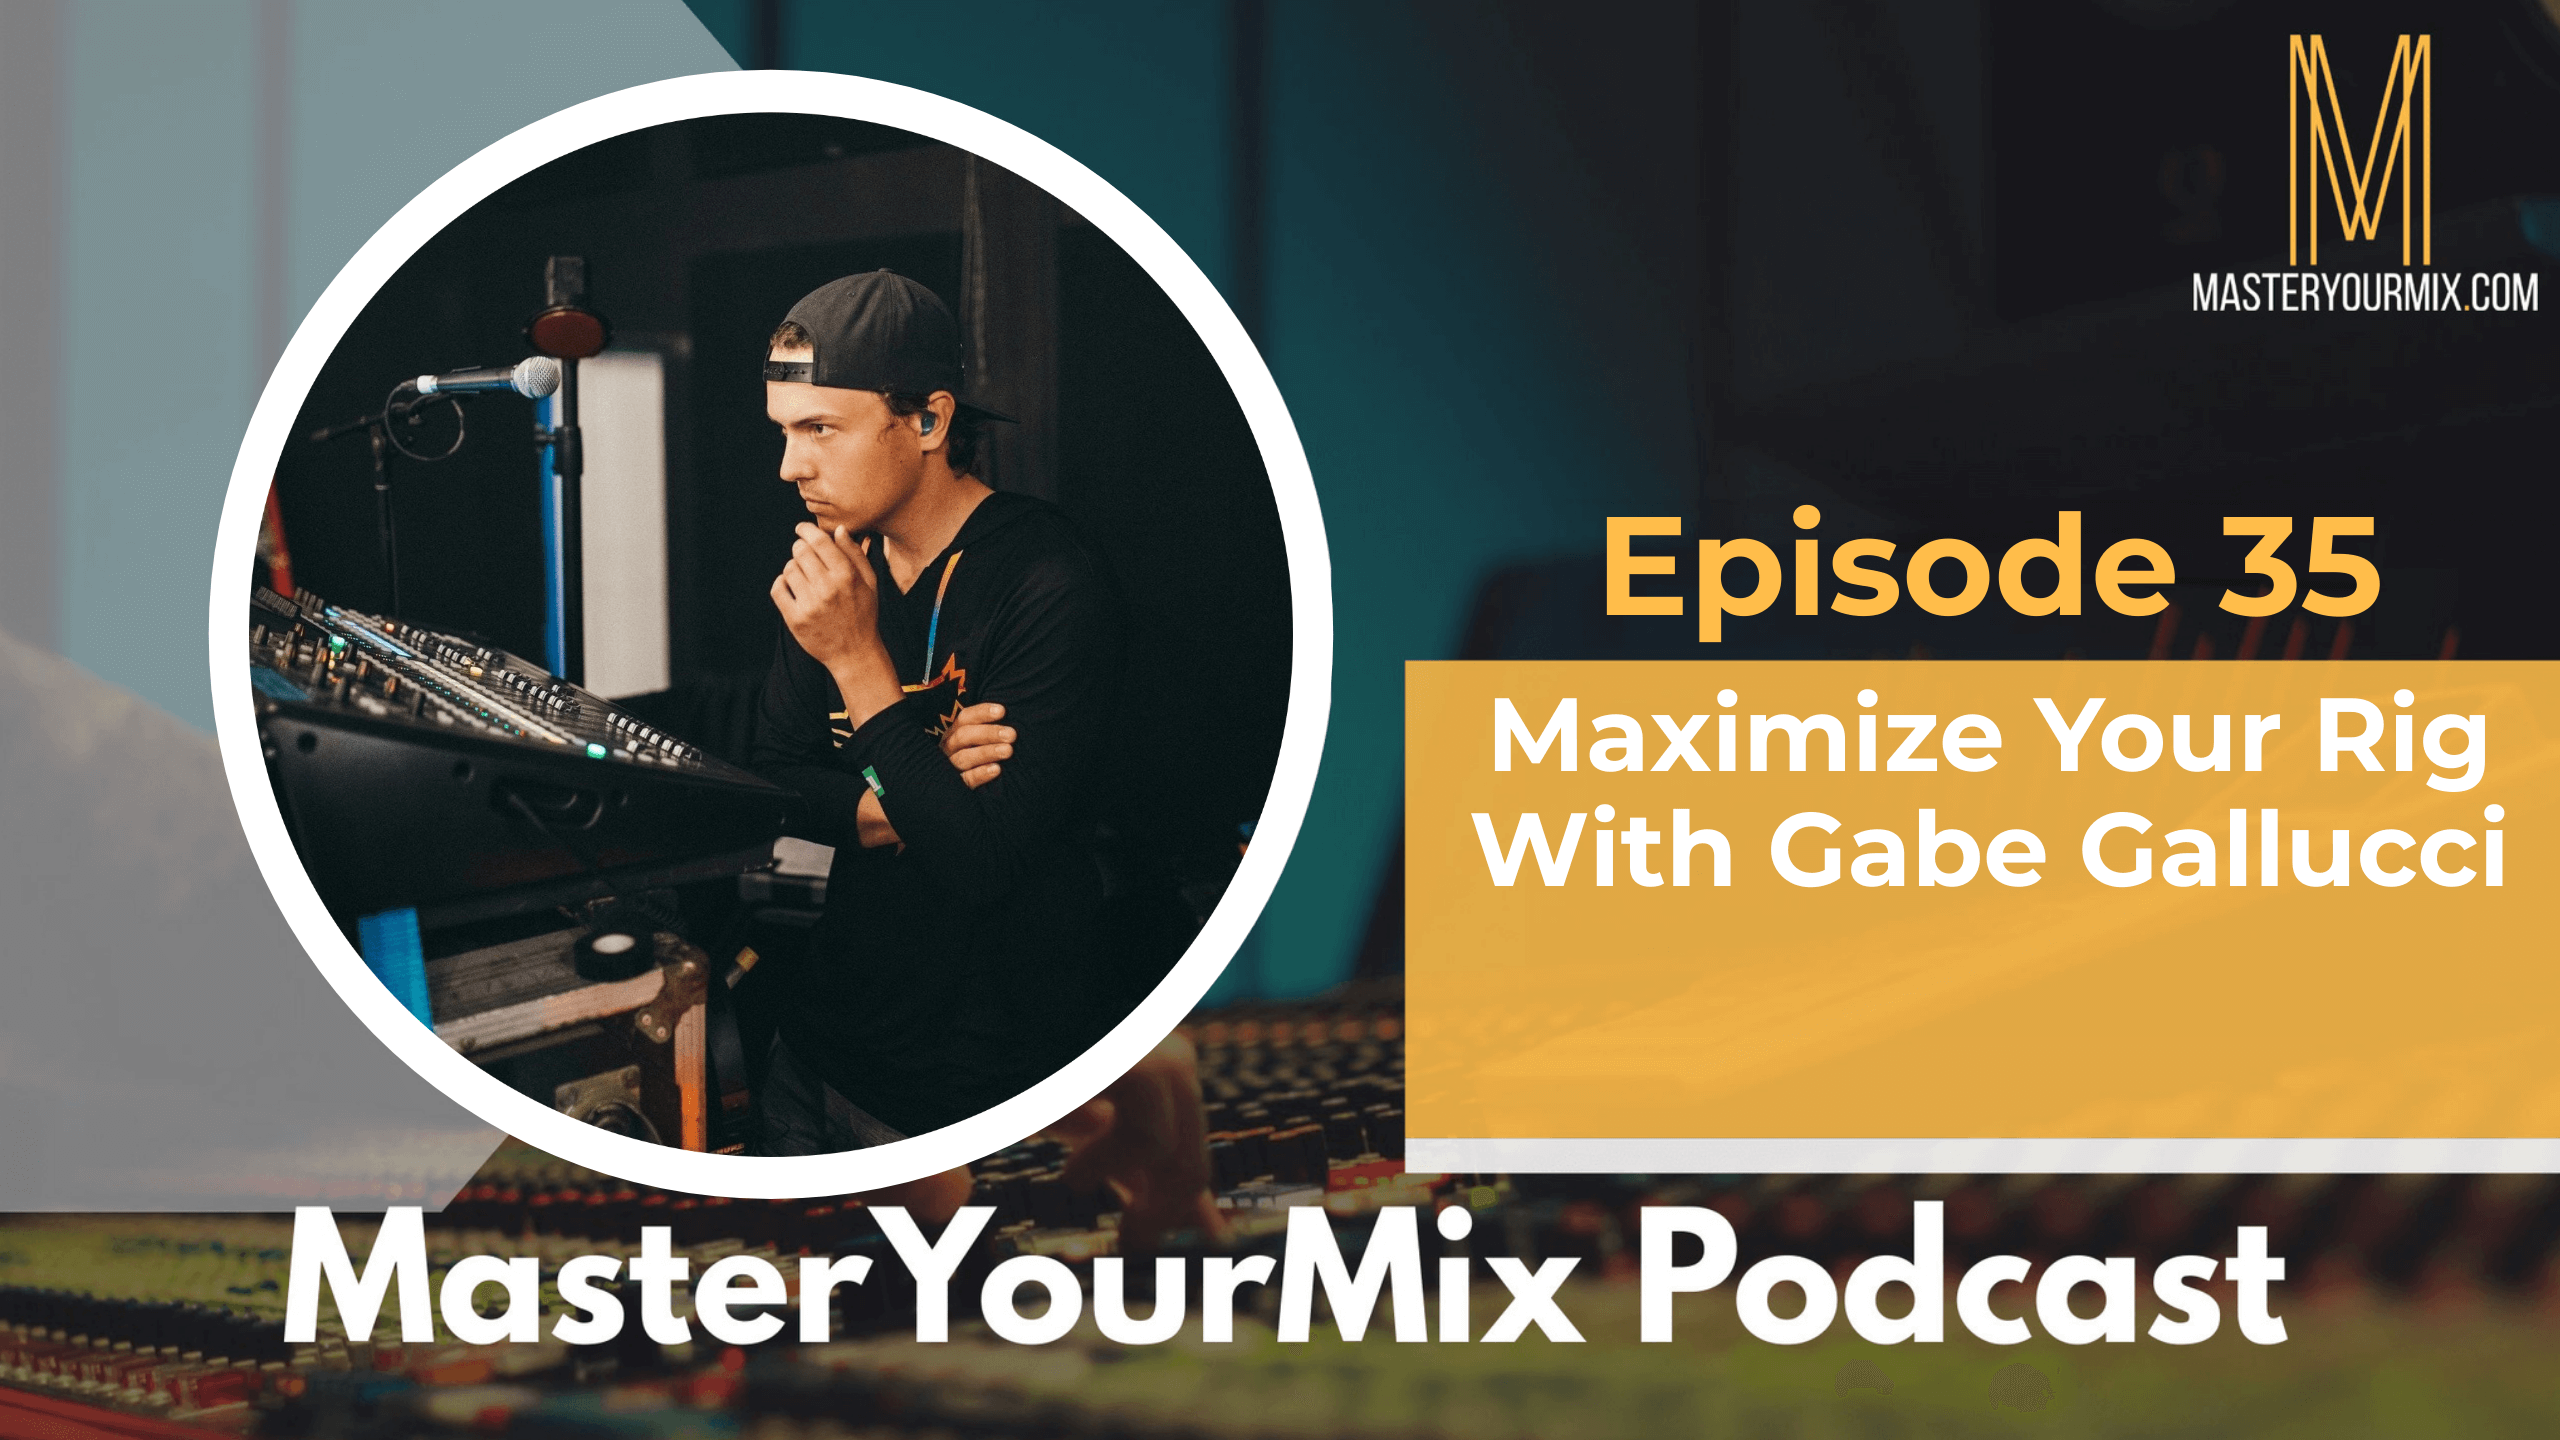 master your mix podcast, ep 35 gabe gallucci